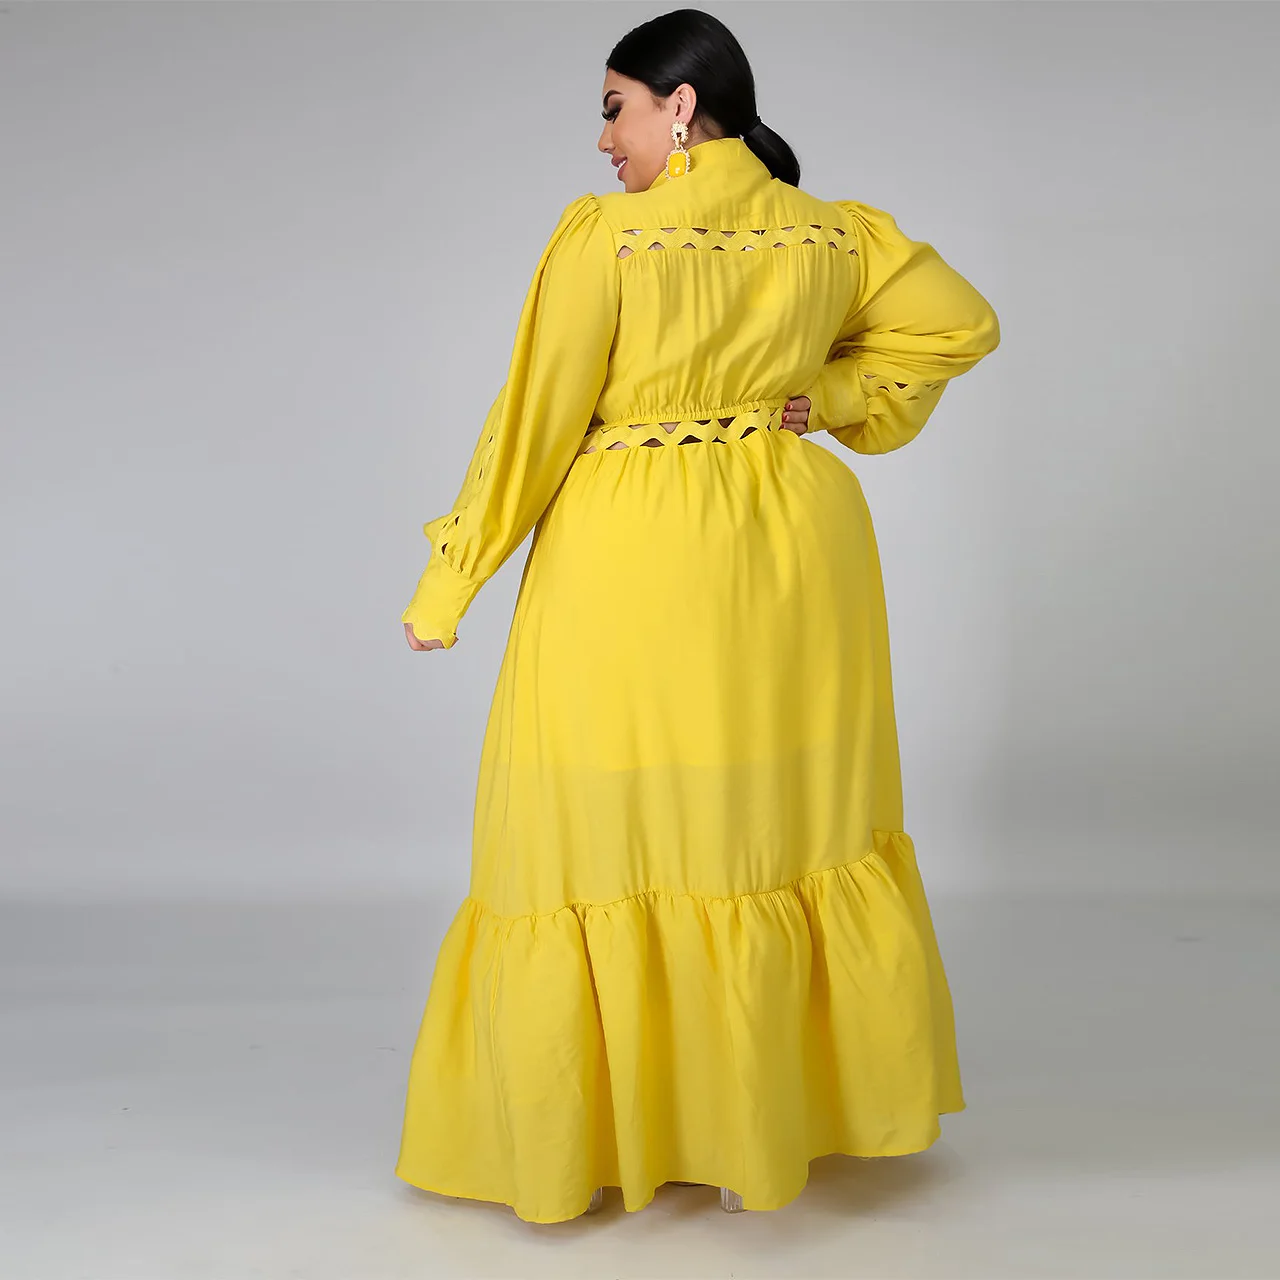 Foma Clothing YF1260 plus size XL-5XL Autumn 2020 women's solid color big skirt with high waist closing suit collar fall dress